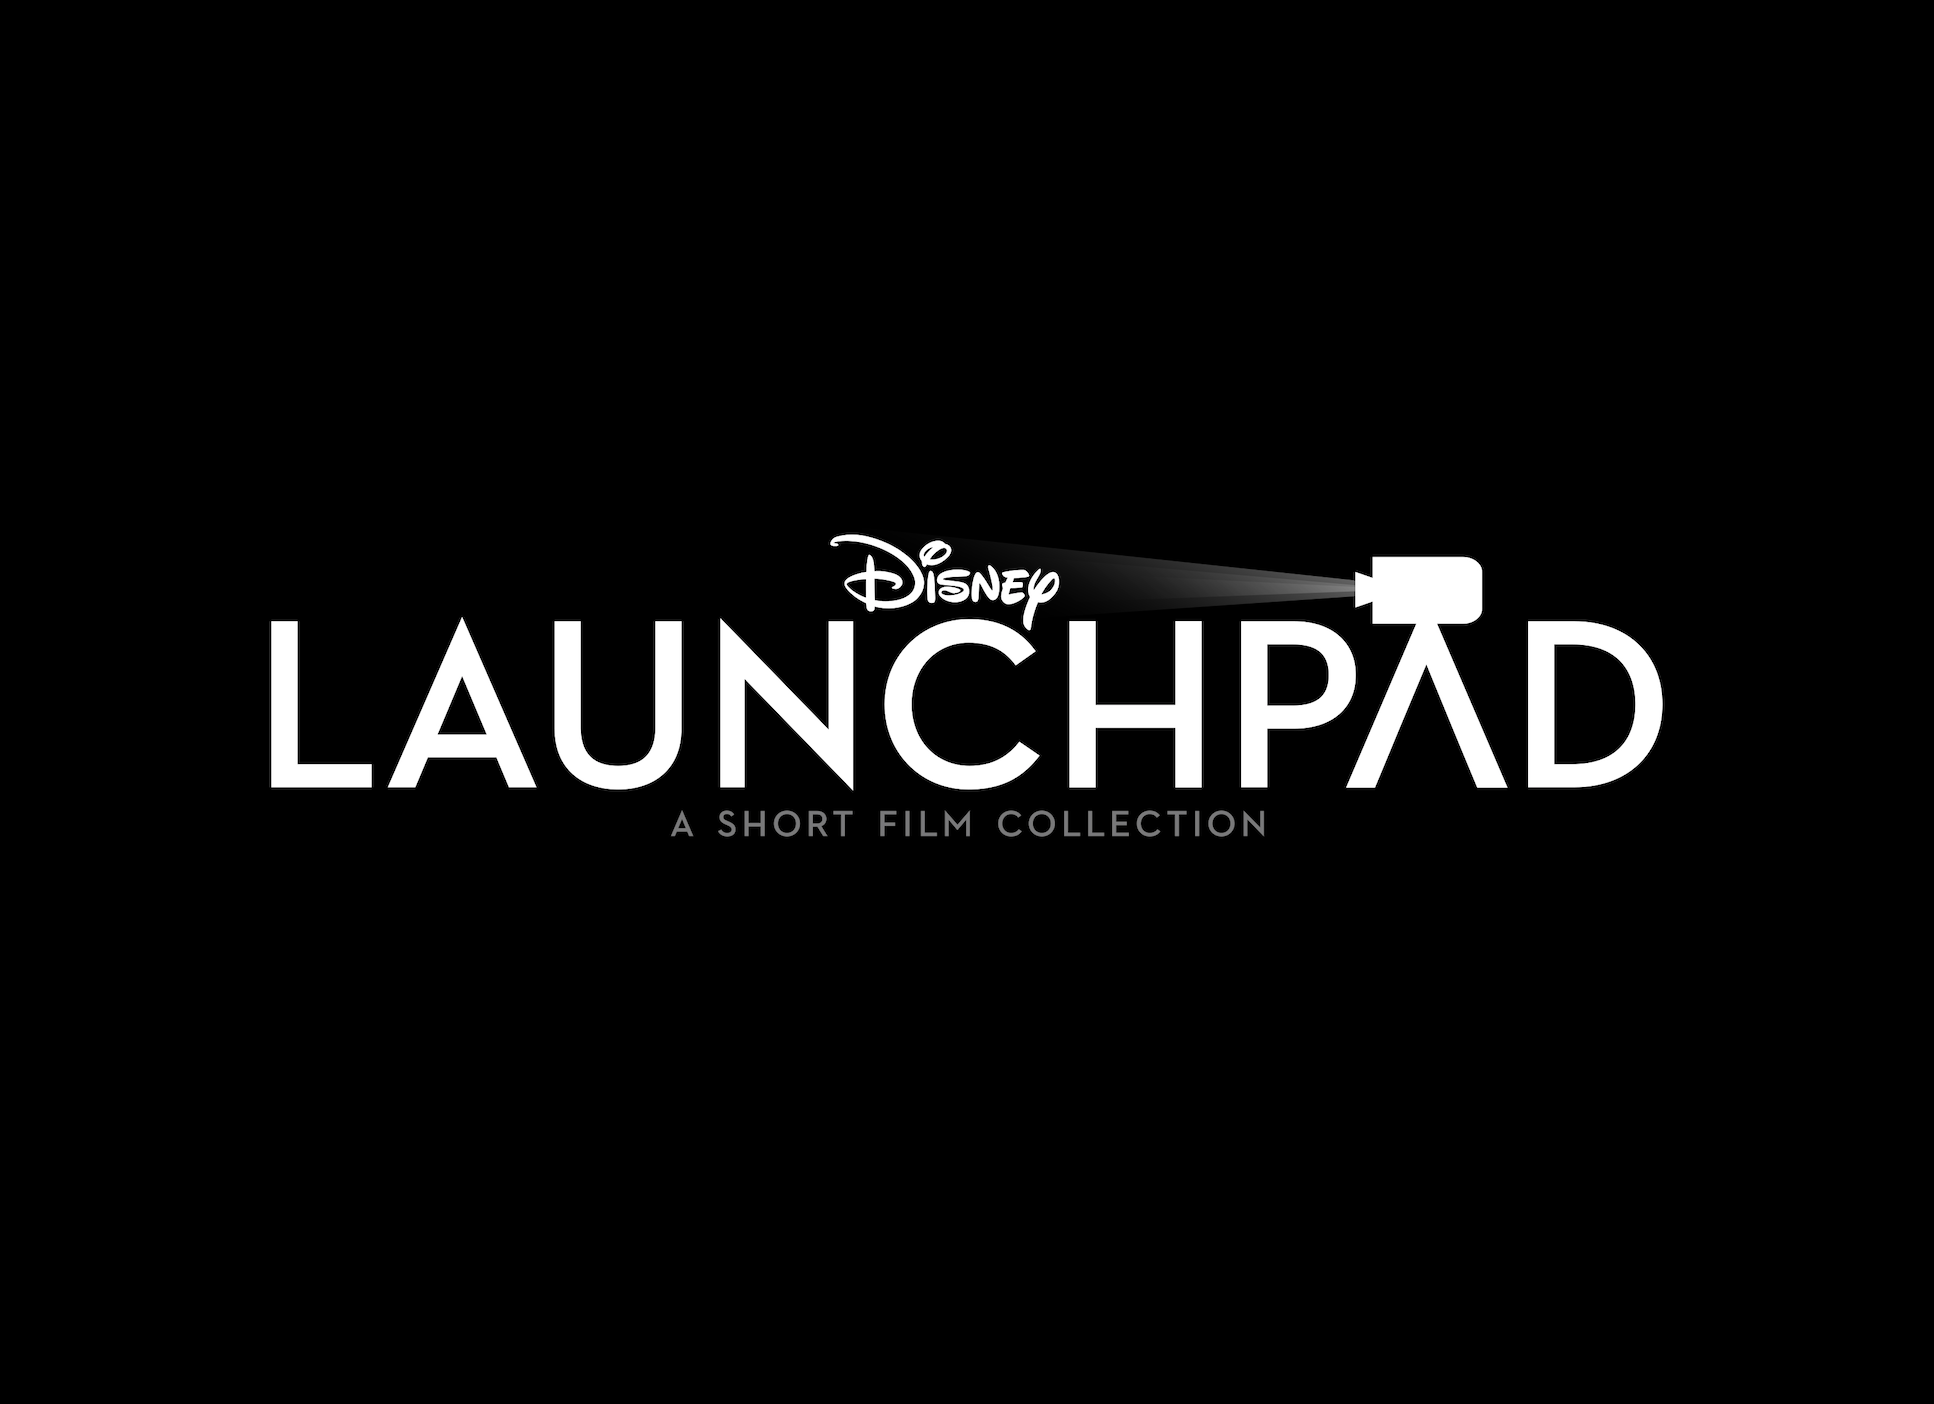 Official trailer for Disney’s inaugural season of “LAUNCHPAD